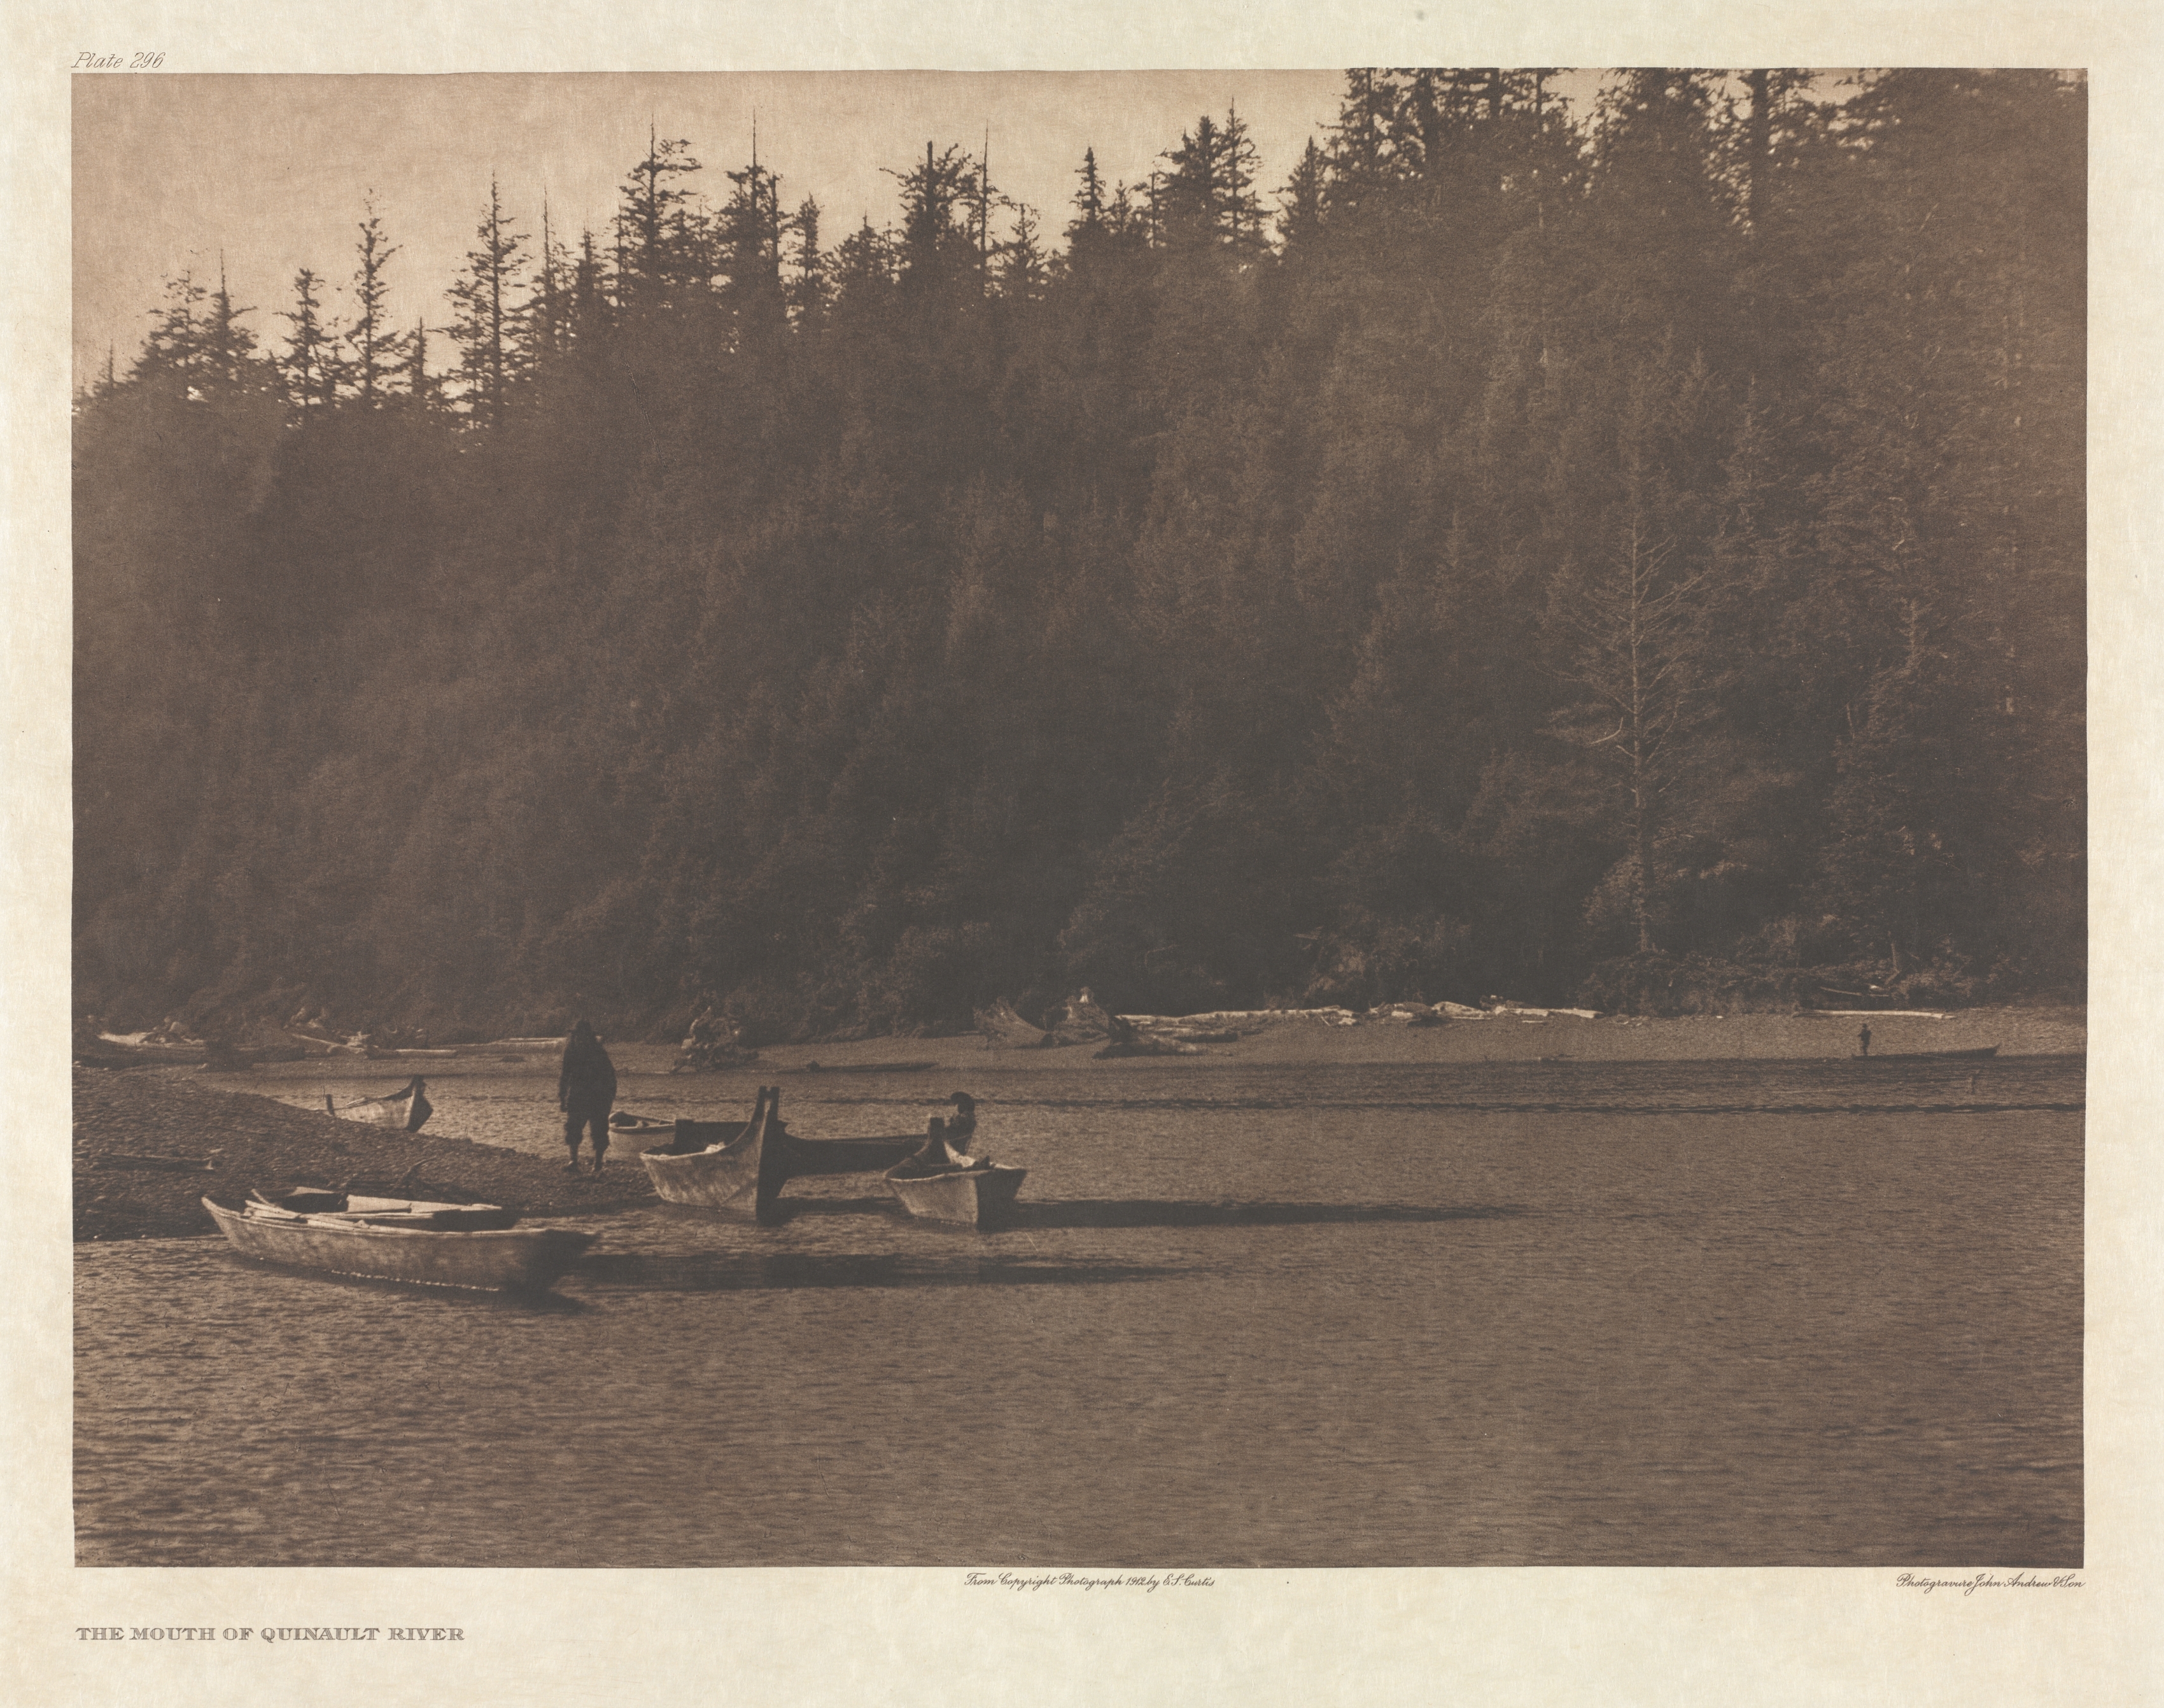 Portfolio IX, Plate 296: The Mouth of the Quinault River